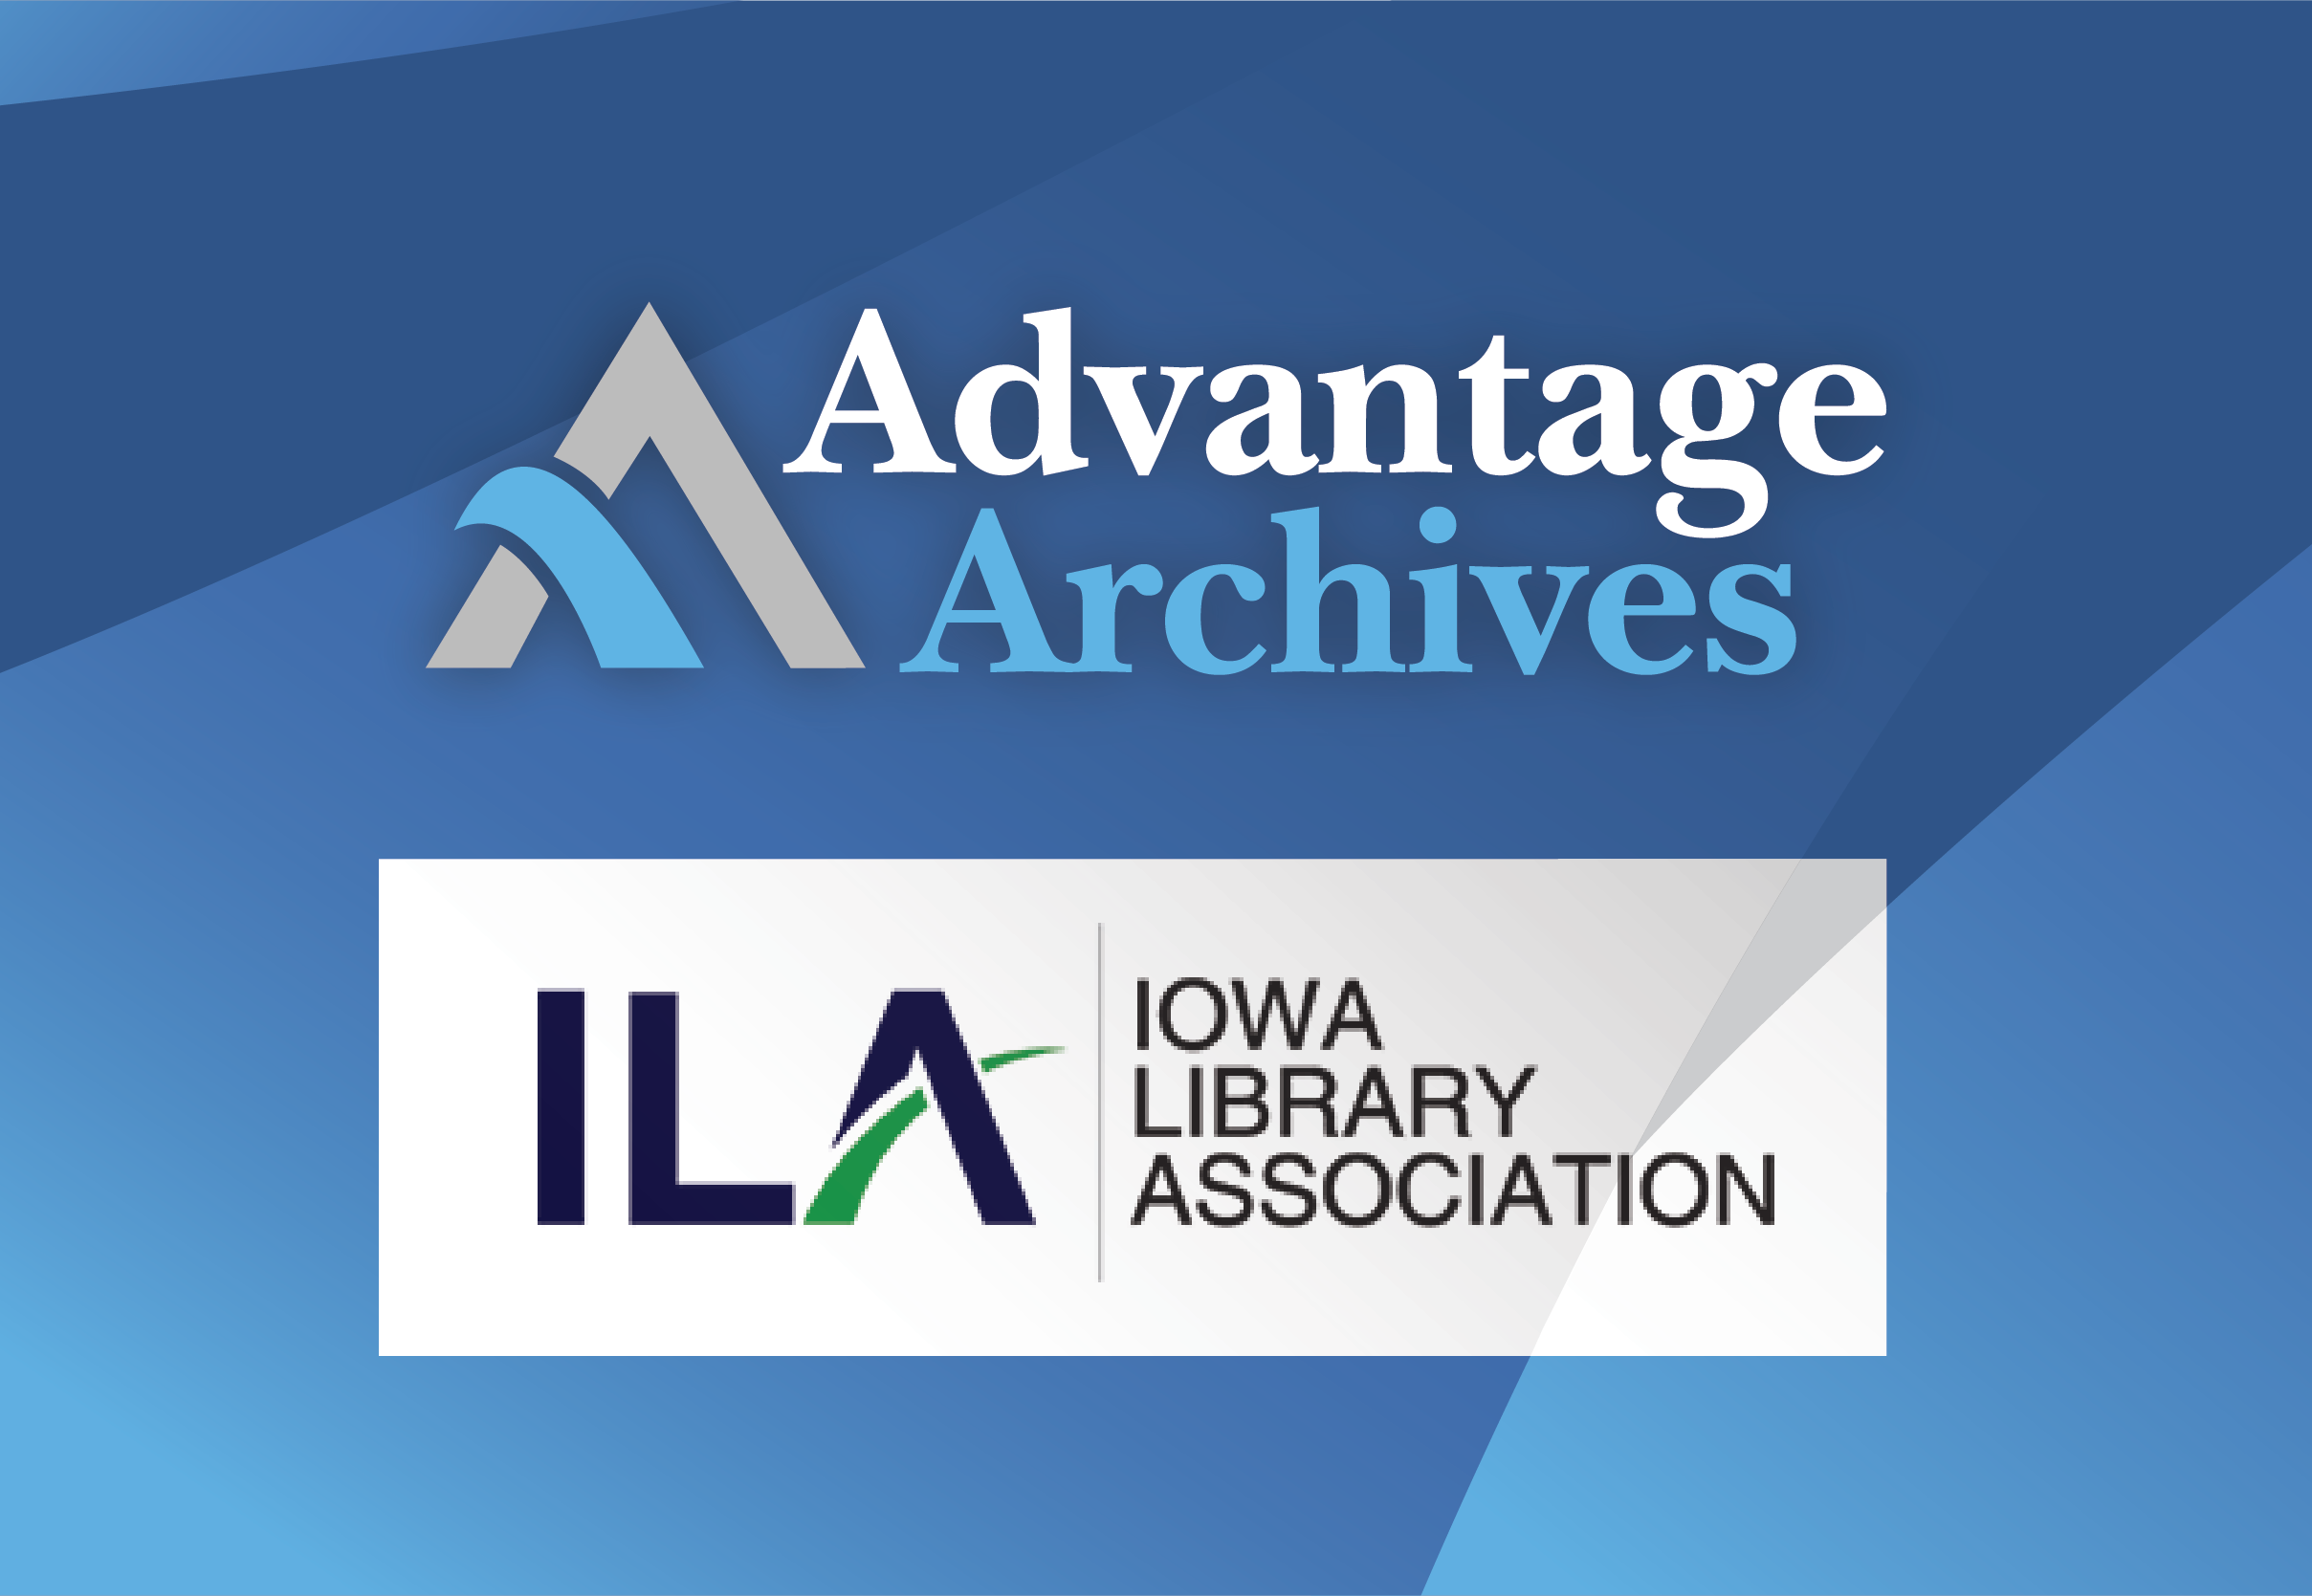 We will be attending the annual Iowa Library Association conference next week, will you?